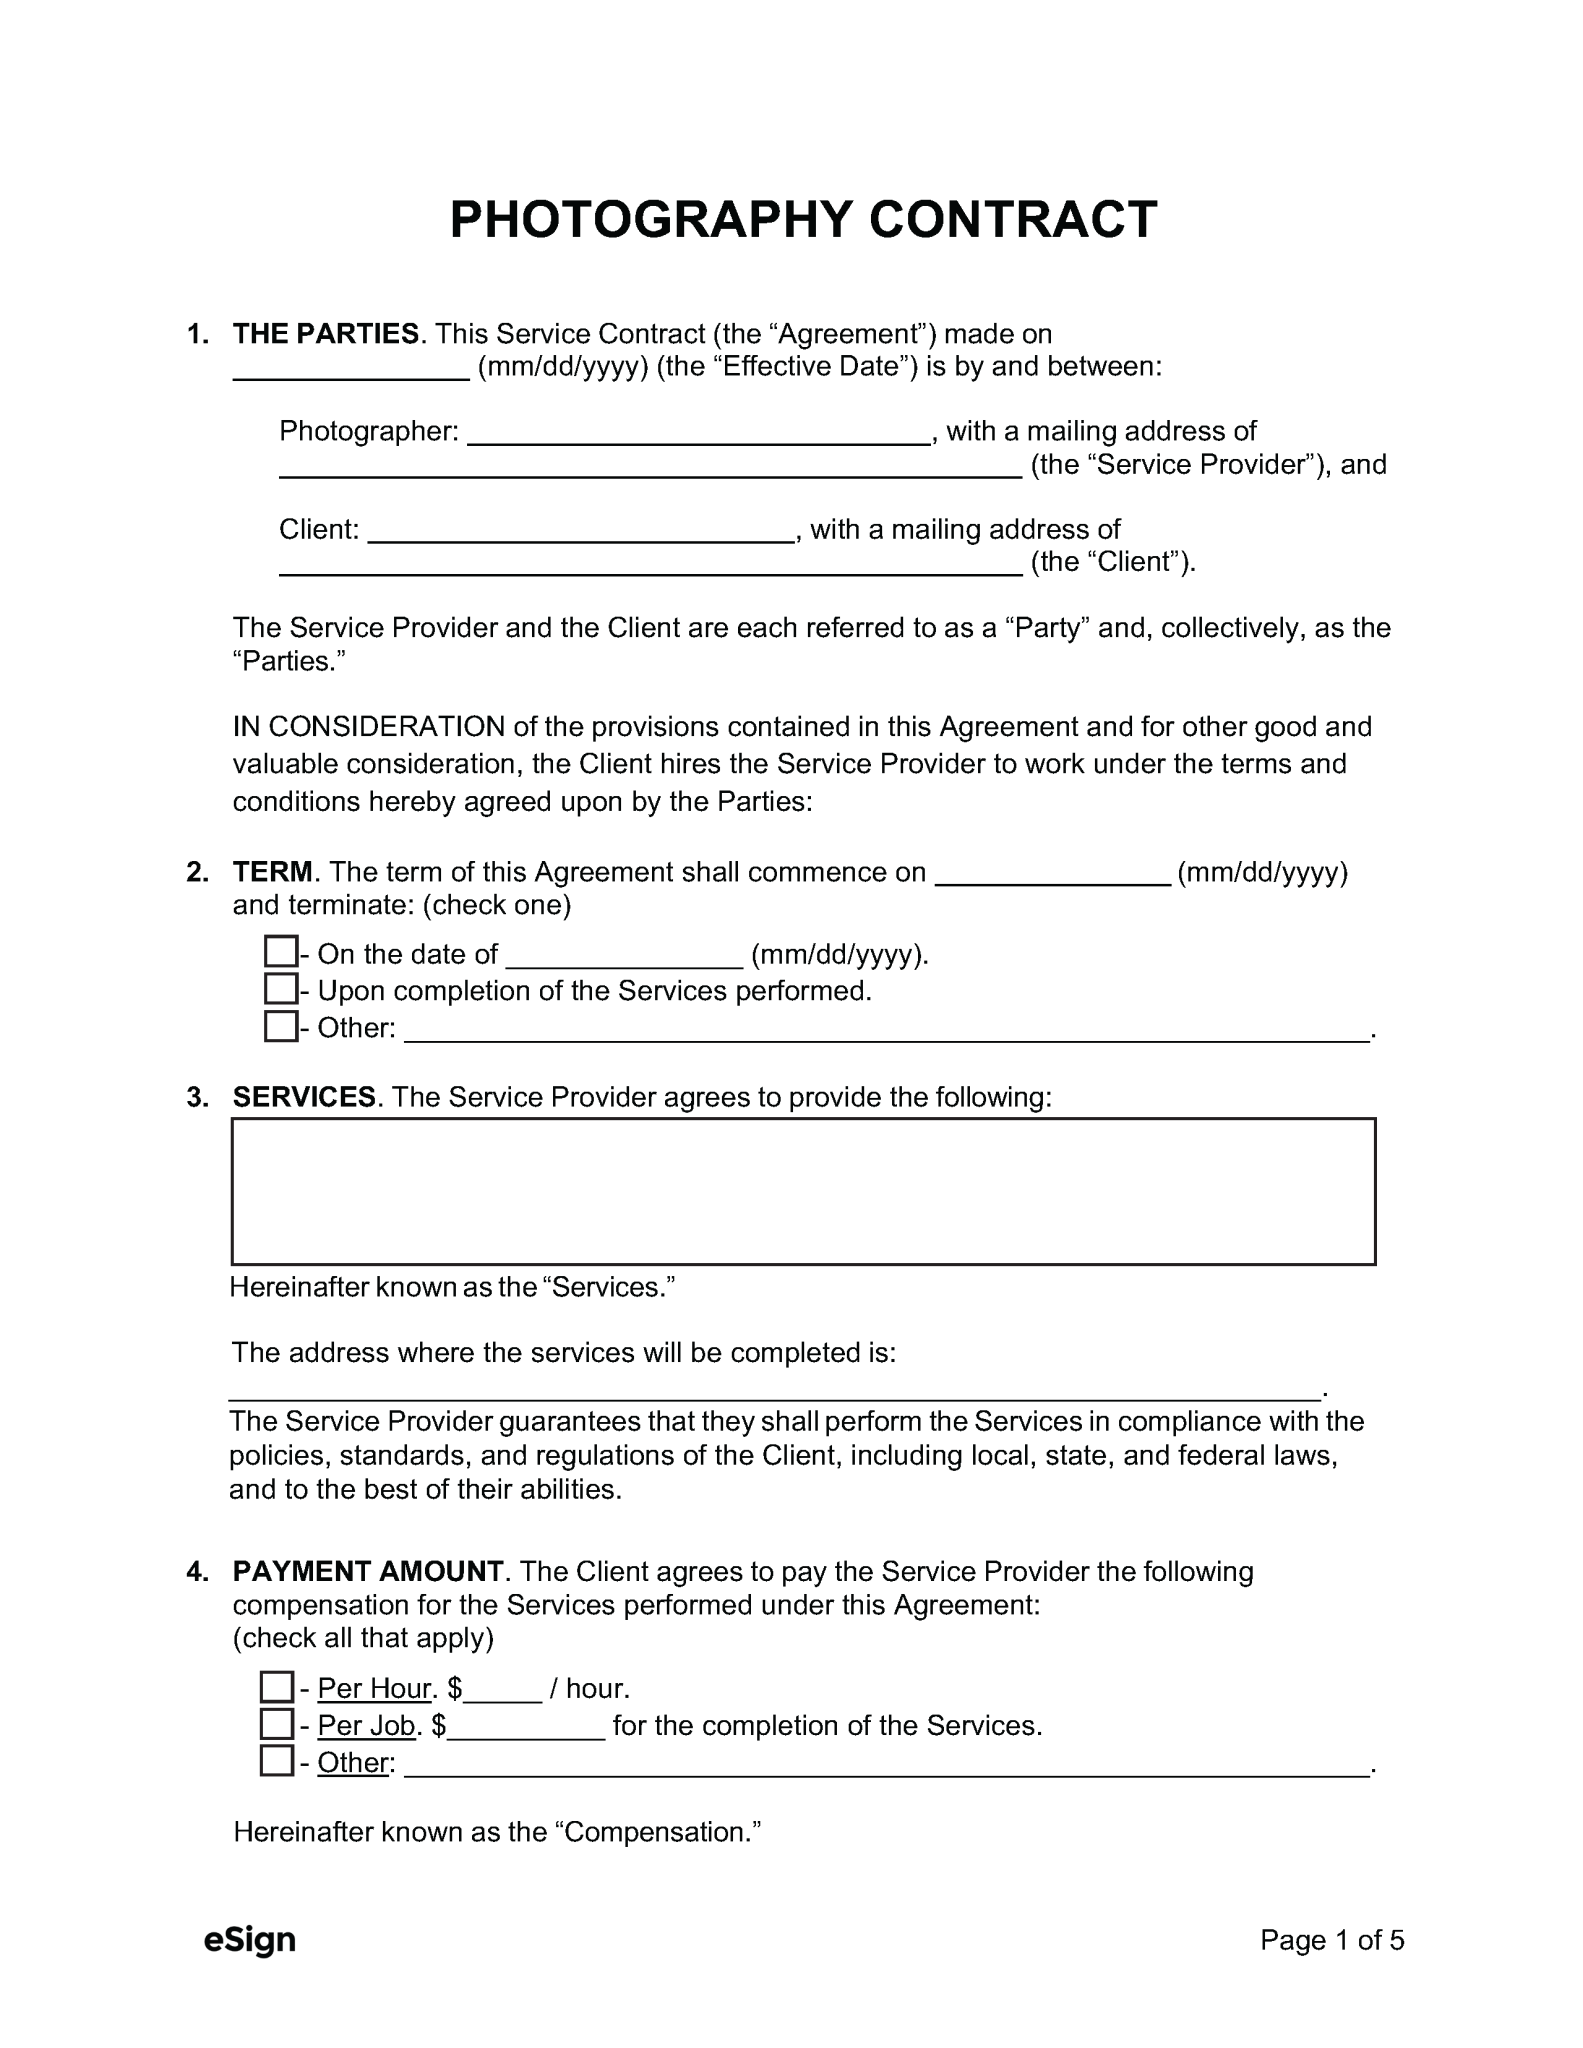 free photography contract templates